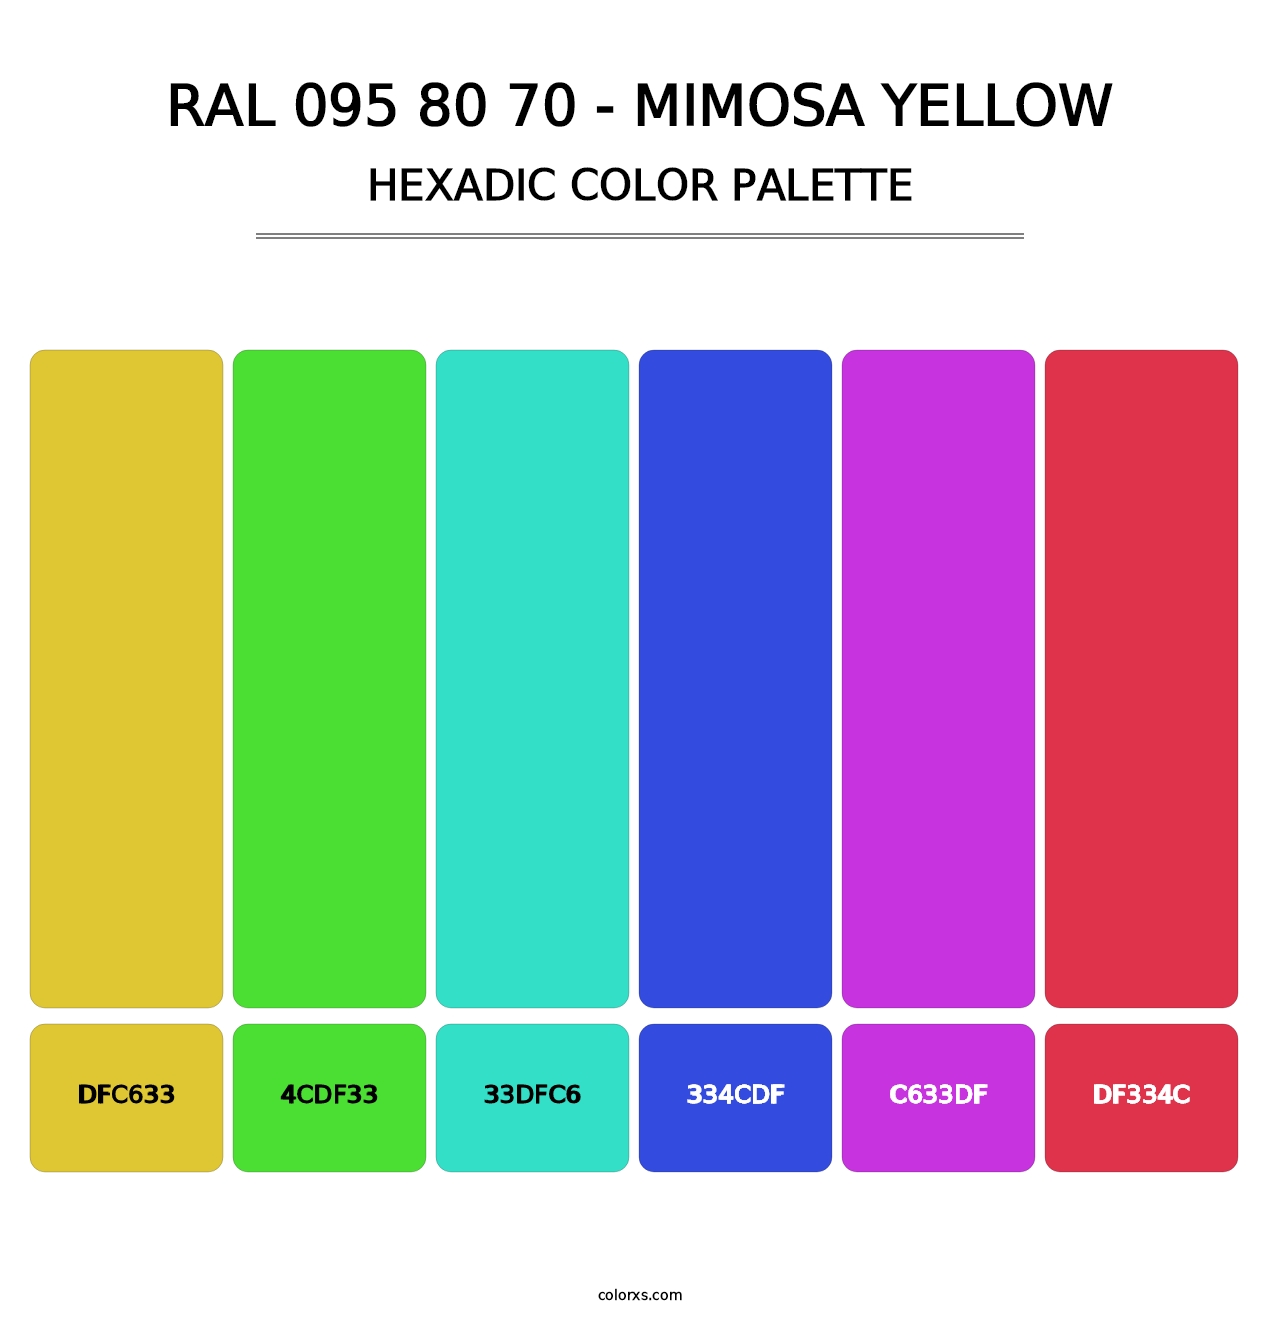 RAL 095 80 70 - Mimosa Yellow - Hexadic Color Palette